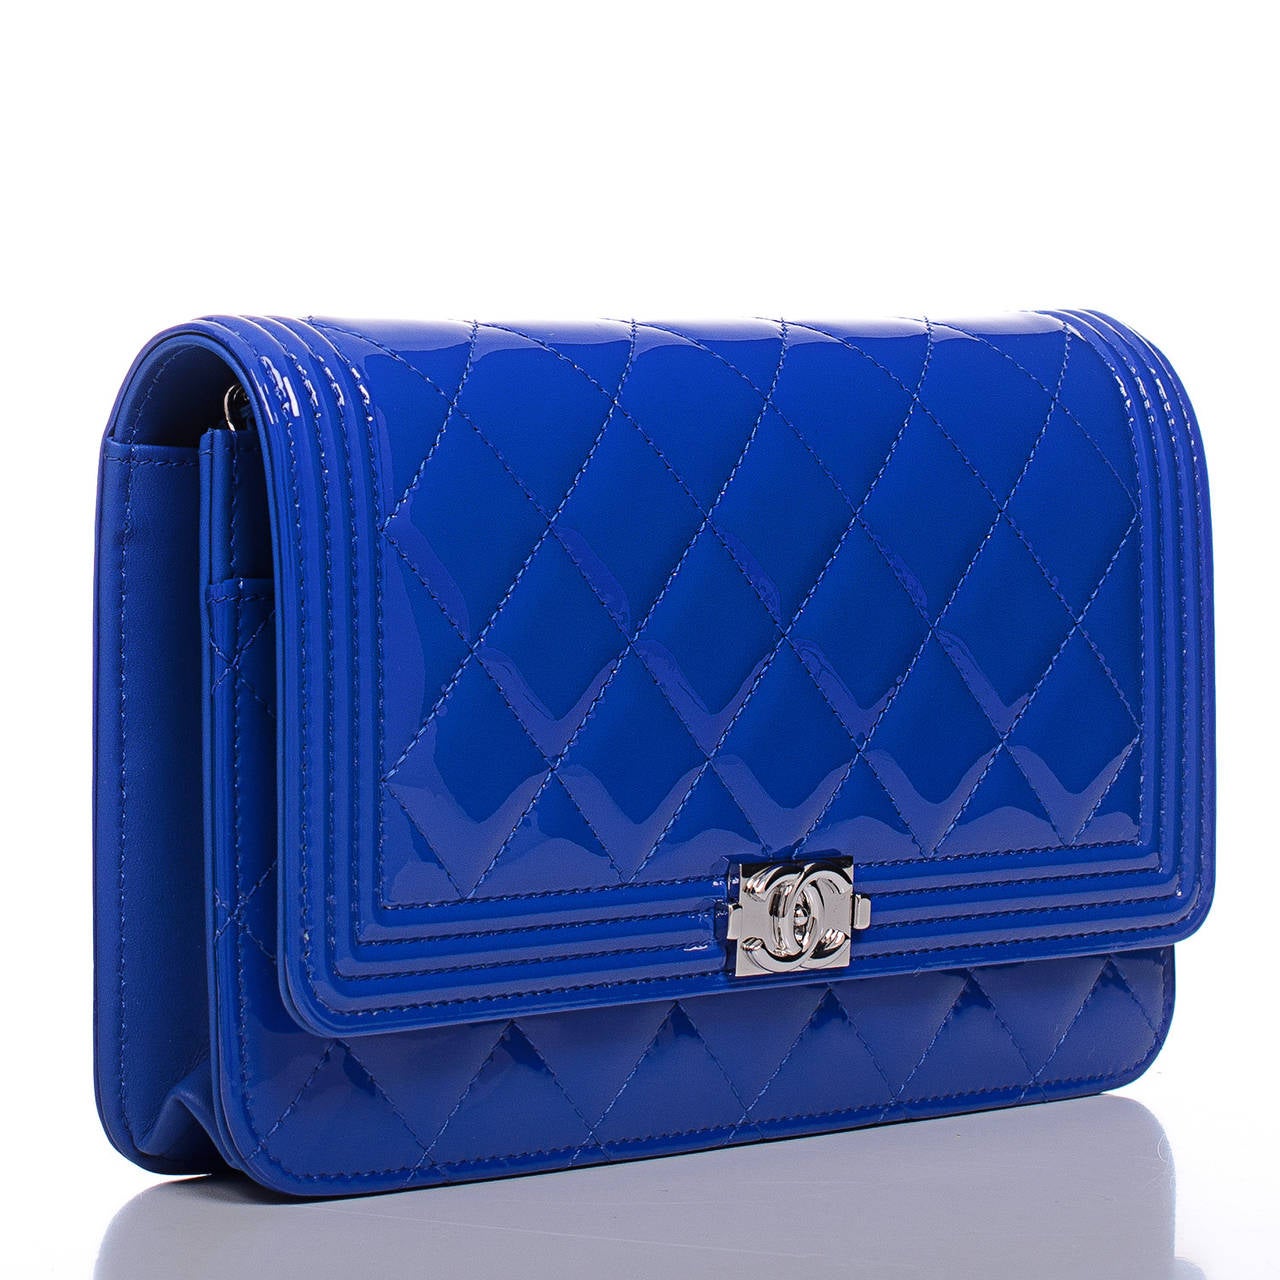 Chanel Boy Wallet On Chain (WOC) of electric blue patent leather with silver tone hardware.

This WOC features a front flap with the signature Le Boy CC charm and hidden snap closure and silver tone metal chain link with blue leather